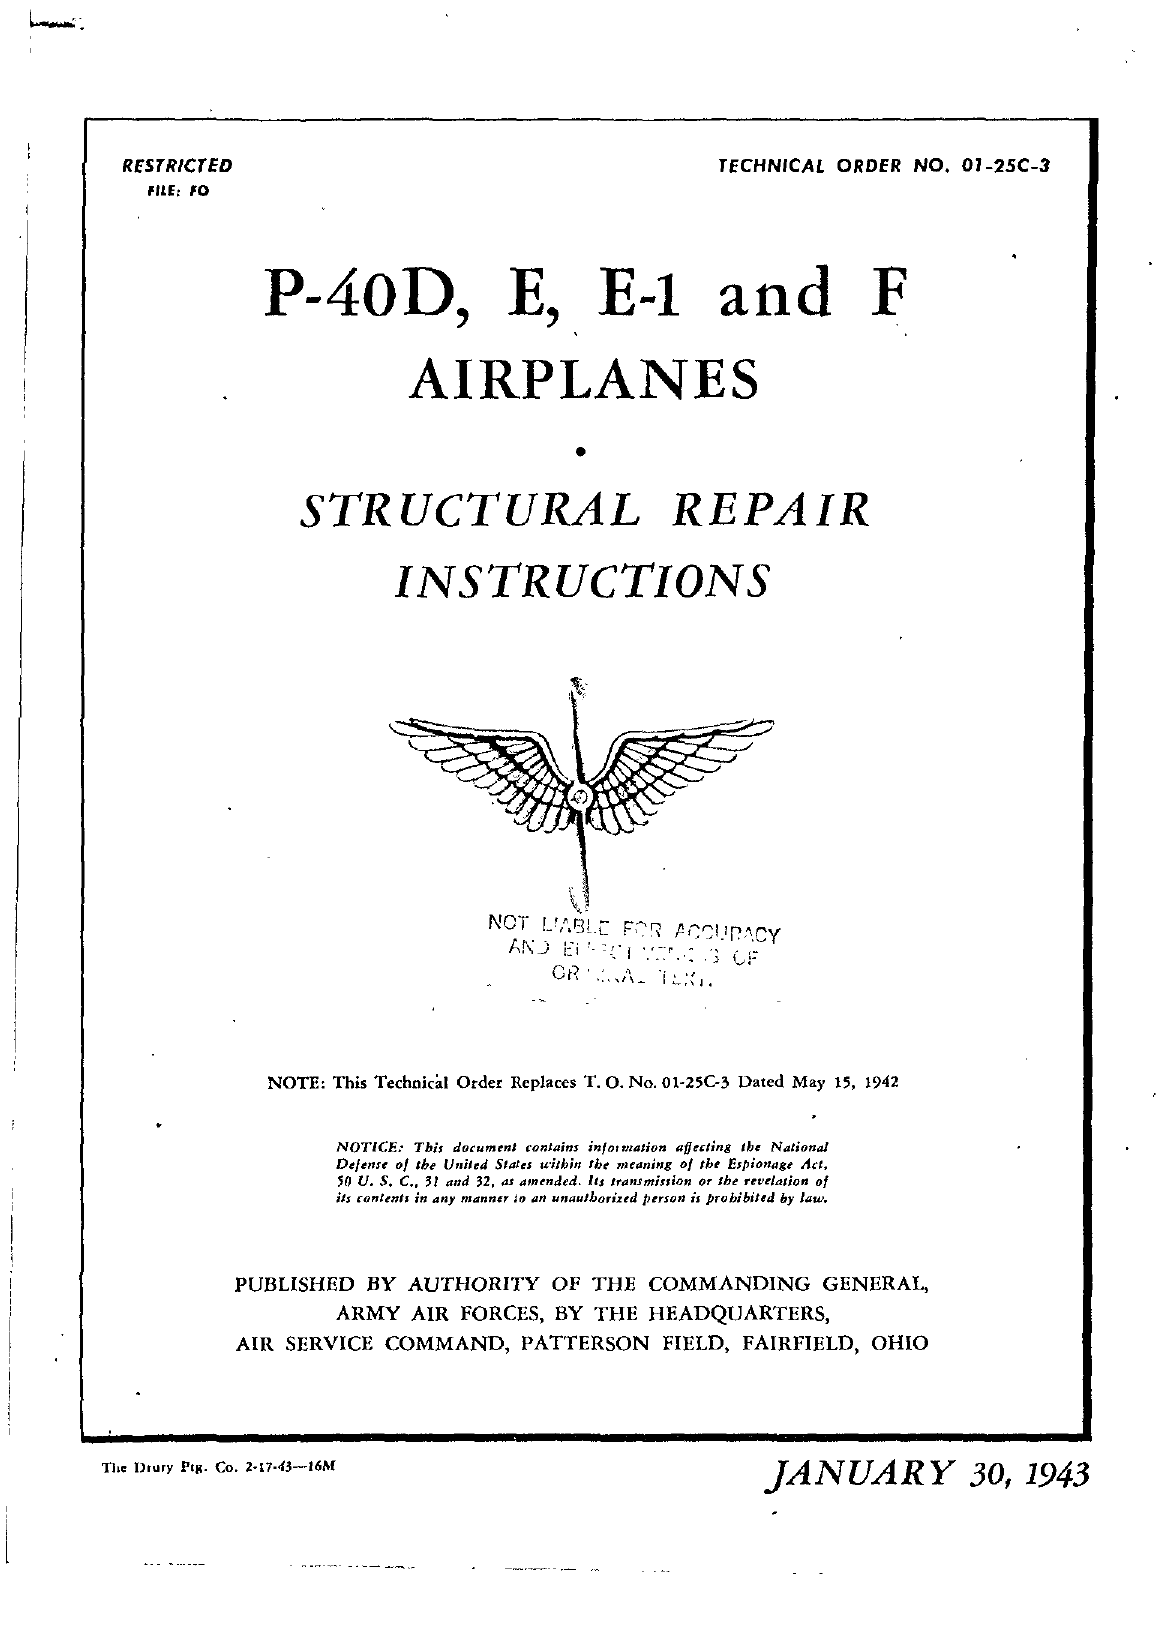 Sample page 1 from AirCorps Library document: Structural Repair Instructions for P-40D, P-40E, P-40E-1 and P-40F